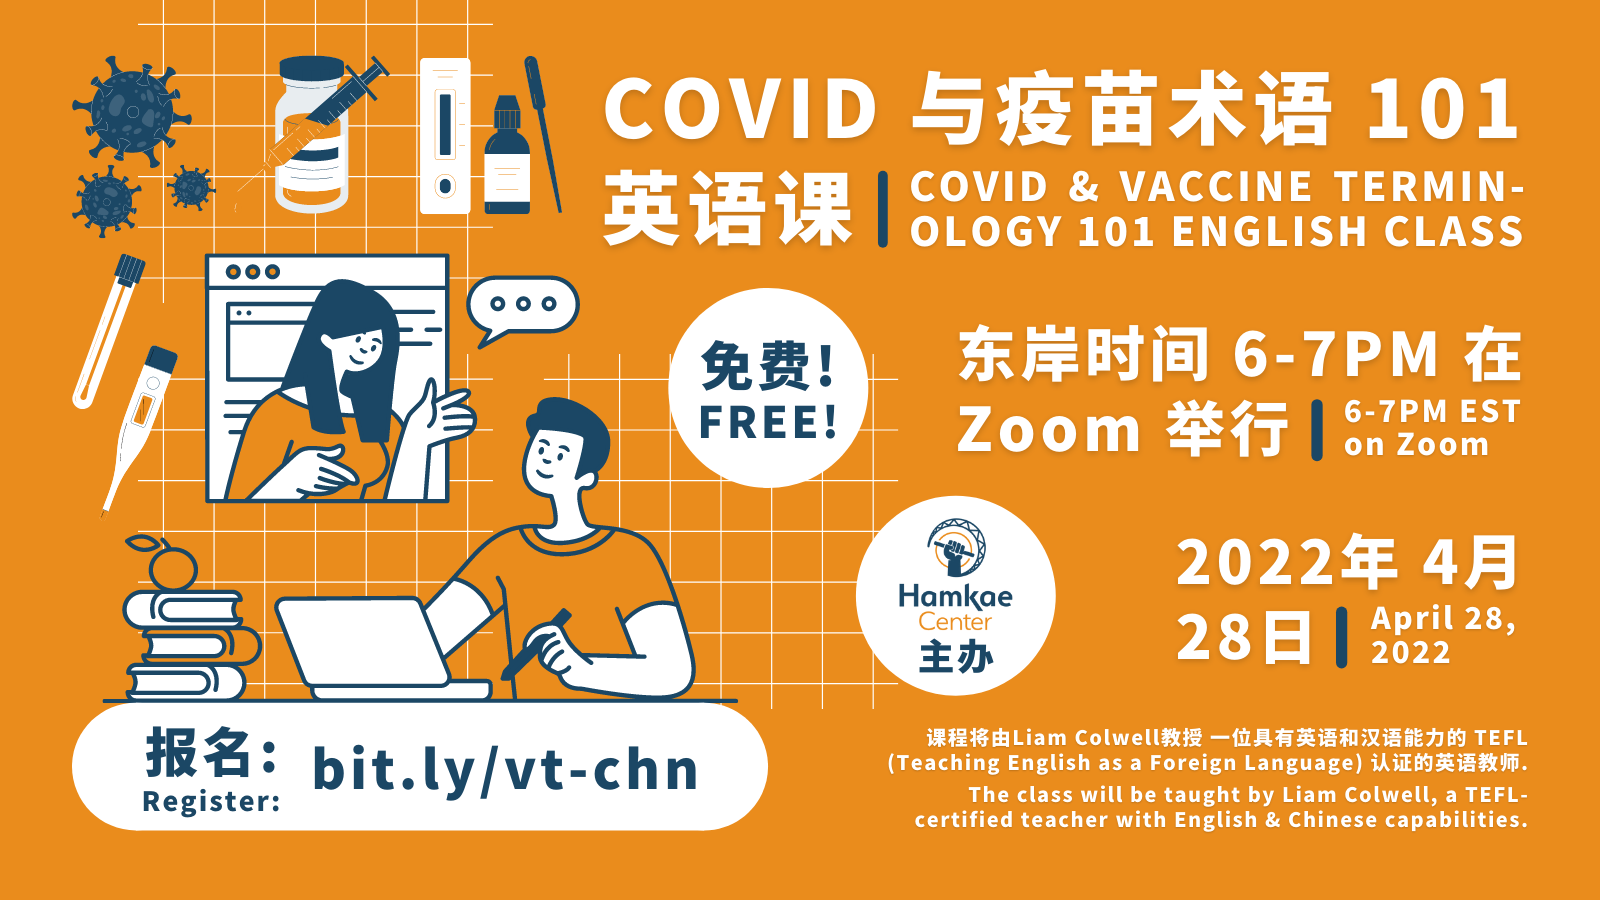 COVID 与疫苗术语 101 英语课 / COVID & Vaccine Terminology 101 English class for Chinese speakers